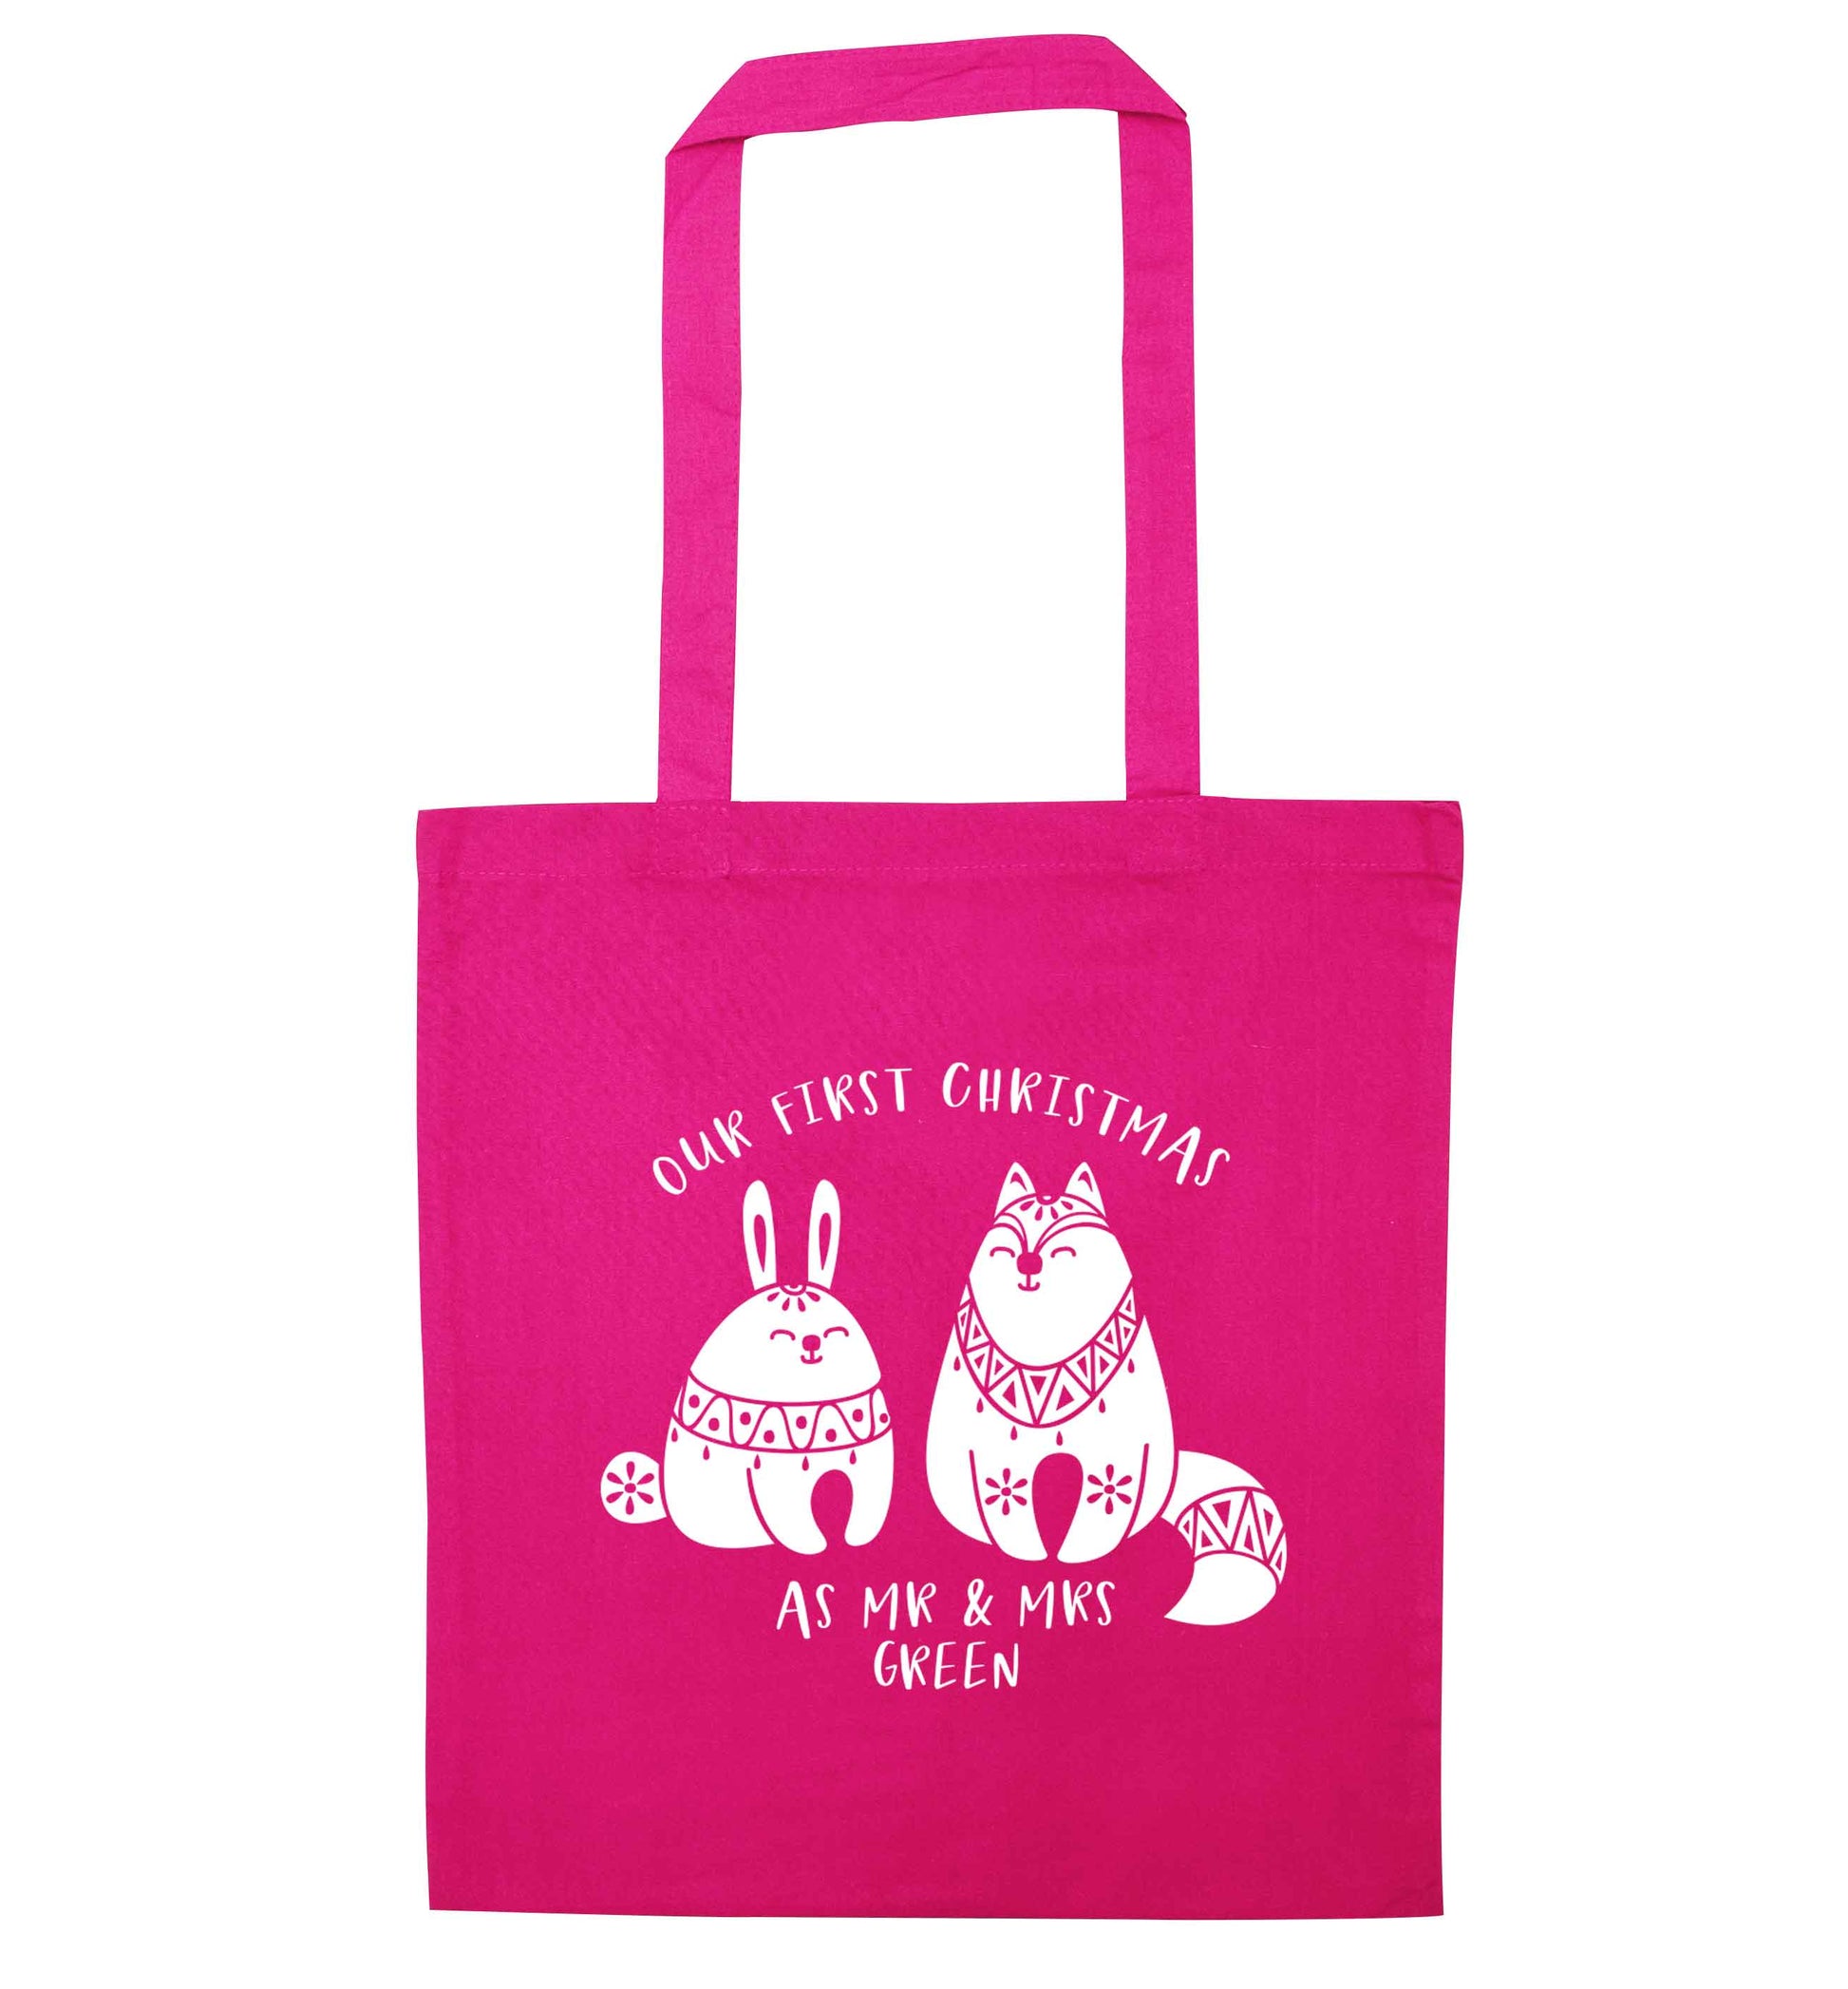 Our first Christmas as Mr & Mrs personalised pink tote bag